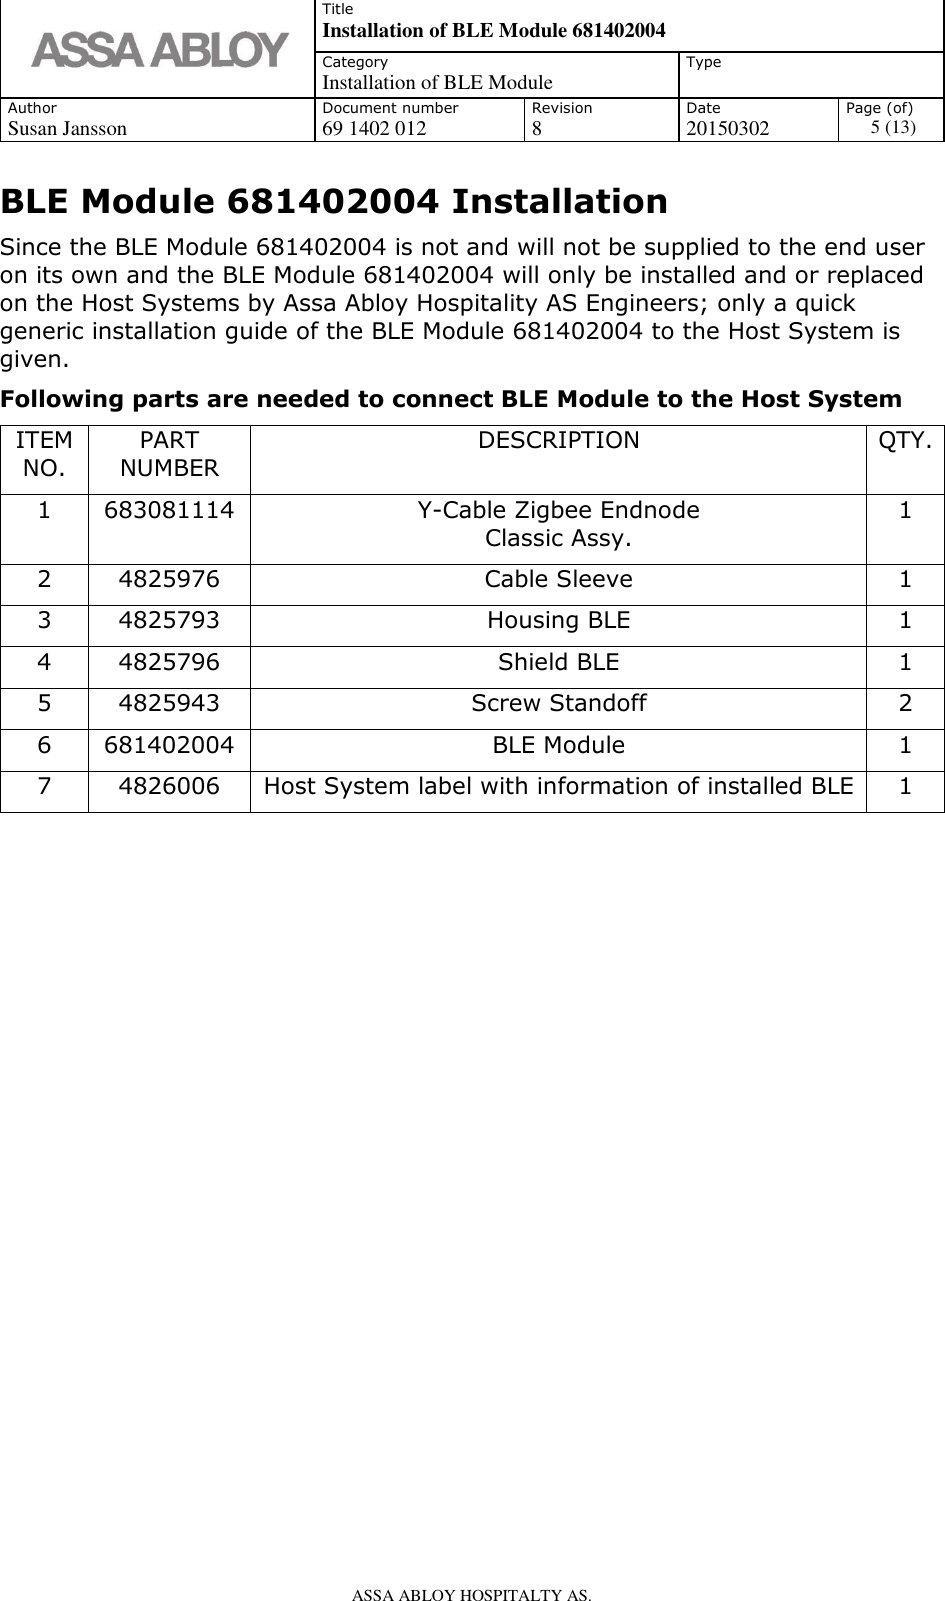   Title Installation of BLE Module 681402004 Category Installation of BLE Module Type  Author Document number Revision Date Page (of) Susan Jansson 69 1402 012 8 20150302 5 (13)    ASSA ABLOY HOSPITALTY AS.   BLE Module 681402004 Installation Since the BLE Module 681402004 is not and will not be supplied to the end user on its own and the BLE Module 681402004 will only be installed and or replaced on the Host Systems by Assa Abloy Hospitality AS Engineers; only a quick generic installation guide of the BLE Module 681402004 to the Host System is given. Following parts are needed to connect BLE Module to the Host System  ITEM NO. PART NUMBER DESCRIPTION QTY. 1 683081114 Y-Cable Zigbee Endnode  Classic Assy. 1 2 4825976 Cable Sleeve 1 3 4825793 Housing BLE 1 4 4825796 Shield BLE 1 5 4825943 Screw Standoff 2 6 681402004 BLE Module 1 7 4826006 Host System label with information of installed BLE 1                     